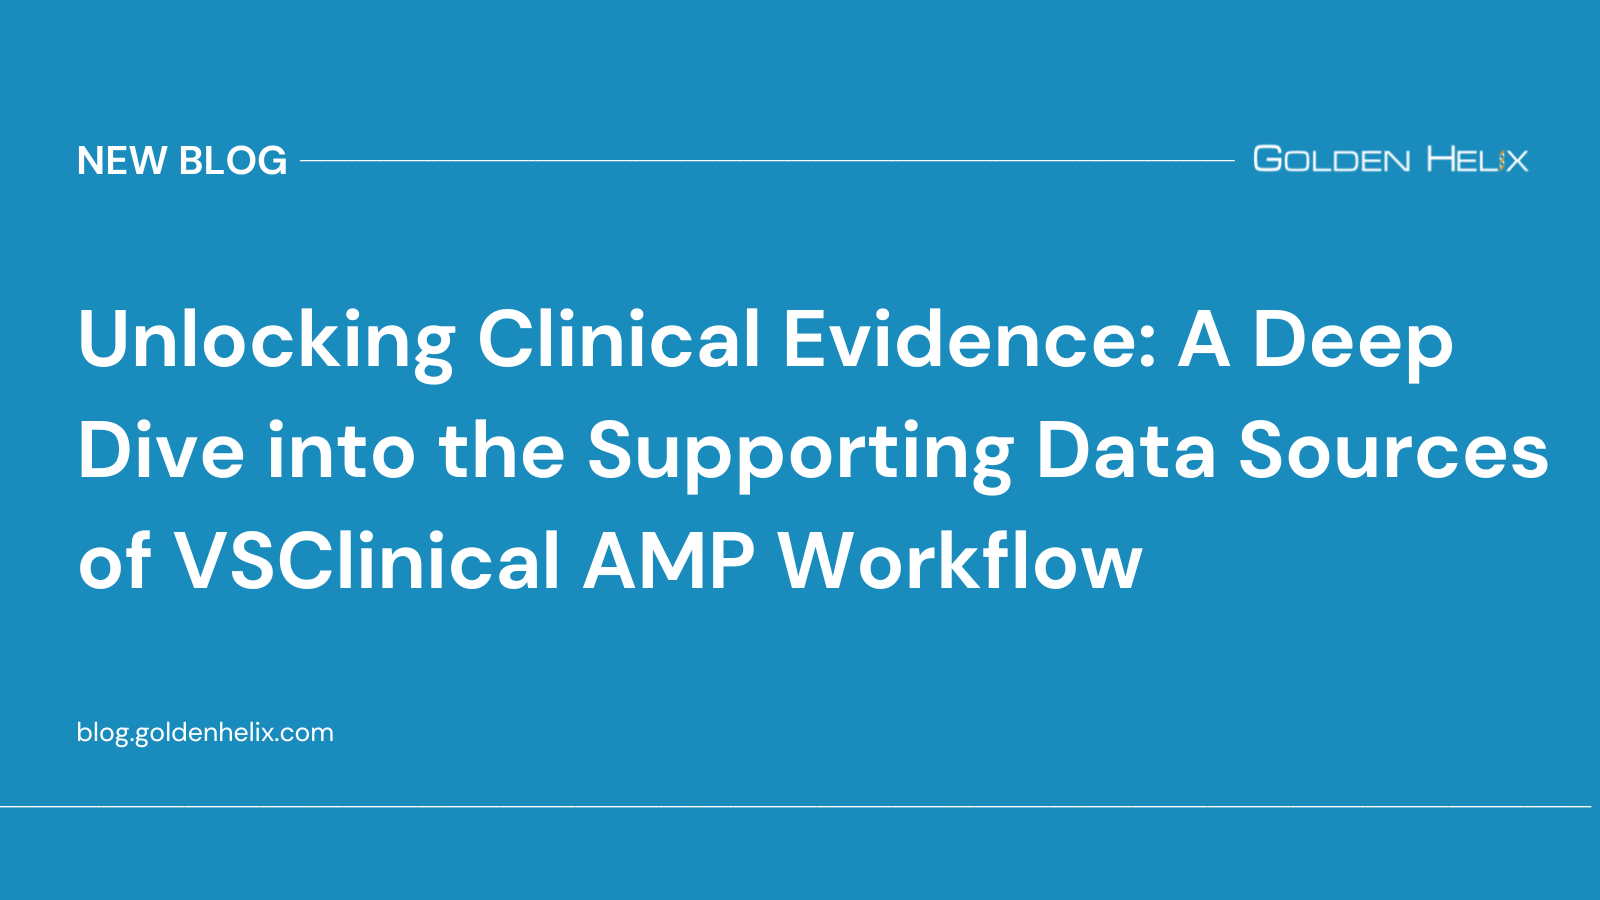 Unlocking Clinical Evidence: A Deep Dive into the Supporting Data Sources of VSClinical AMP Workflow